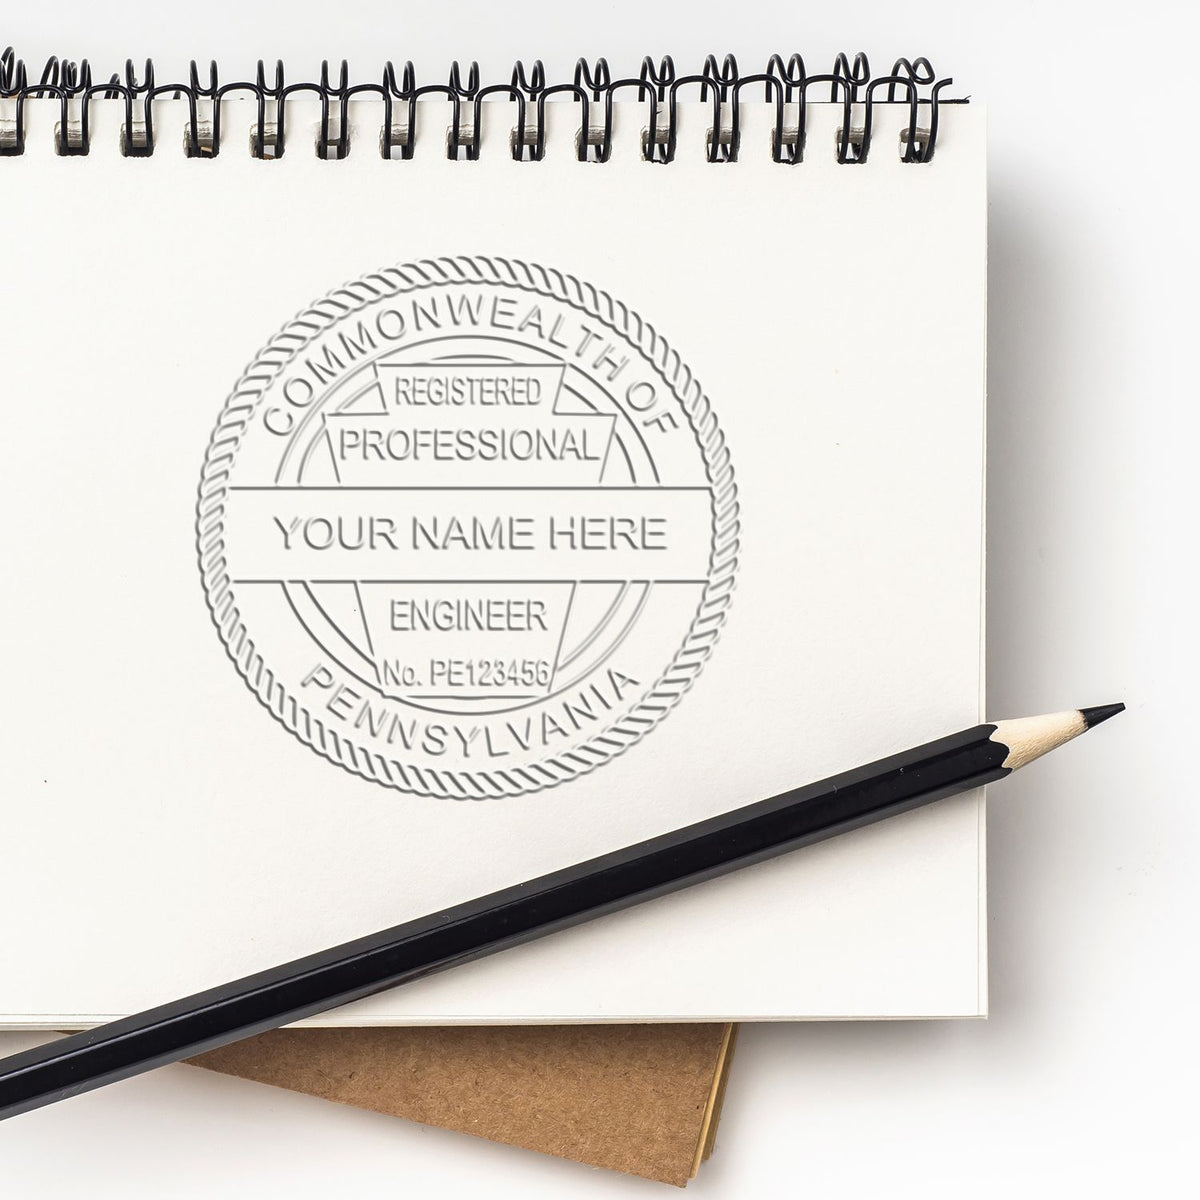 This paper is stamped with a sample imprint of the Pennsylvania Engineer Desk Seal, signifying its quality and reliability.